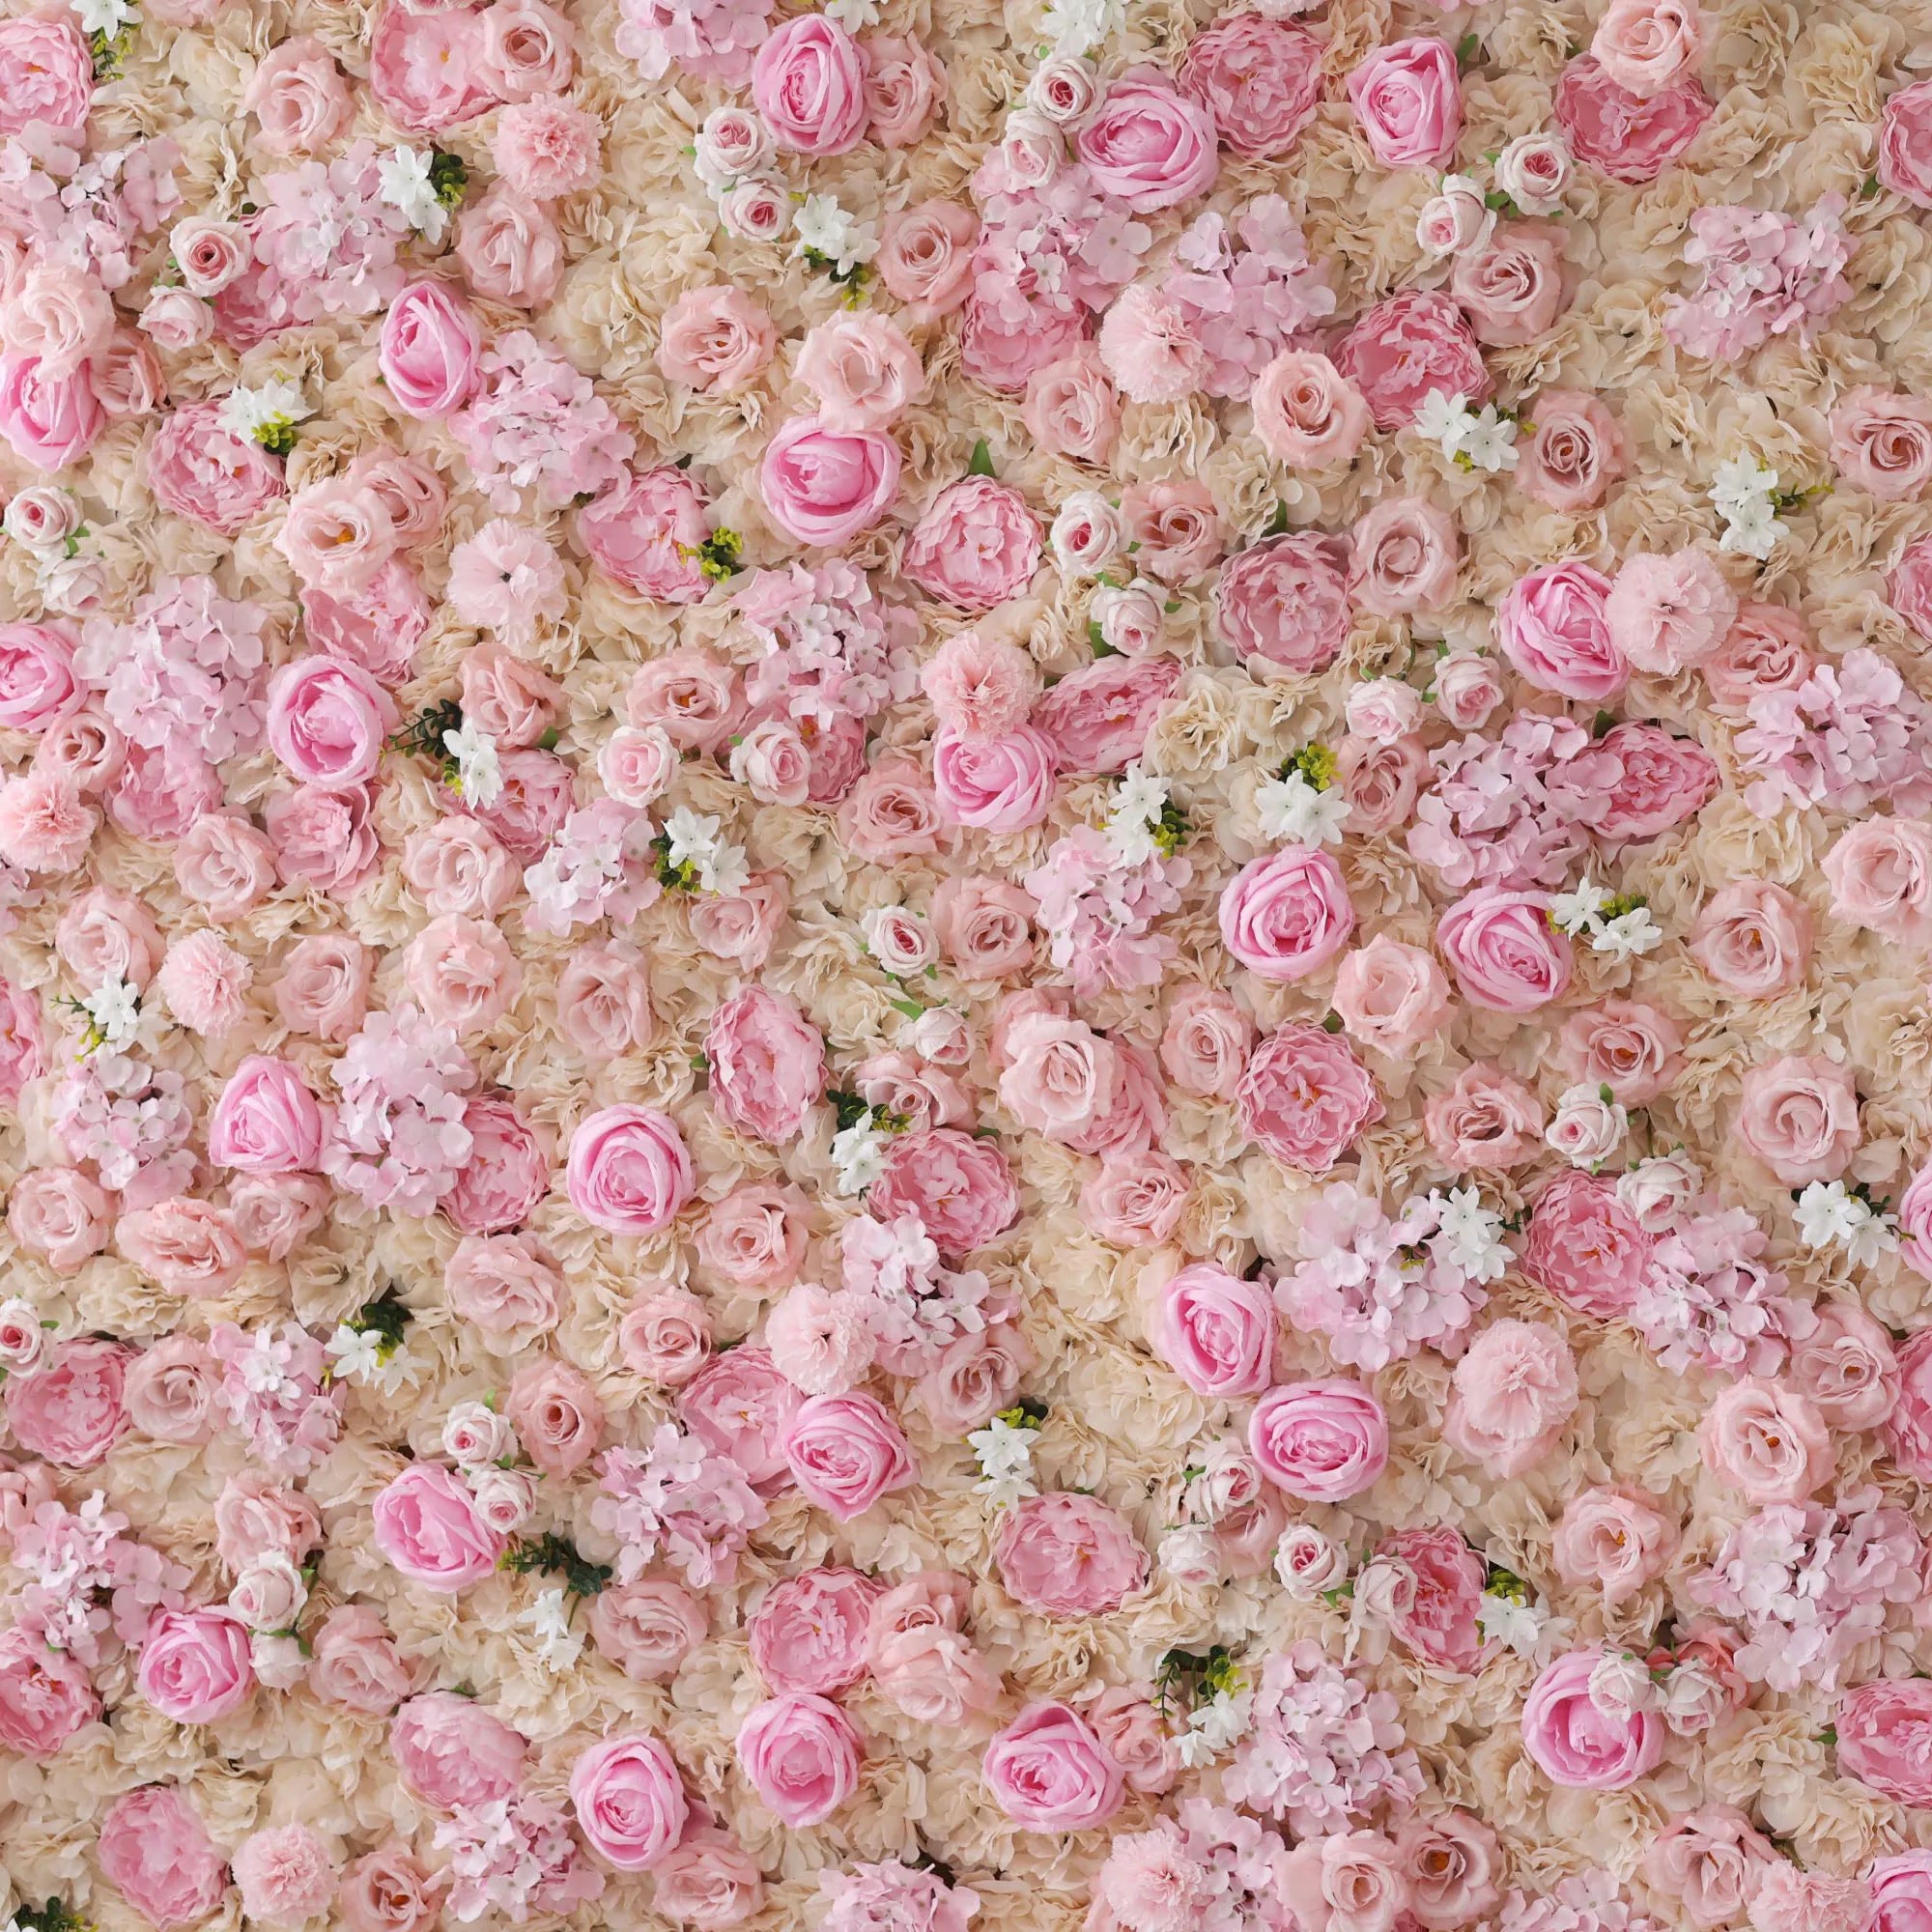 ValarFlower Artificial Floral Wall Backdrop: Blossom Bliss Artificial Floral Wall Backdrop: Enchanted Pink Rose Edition-VF-267